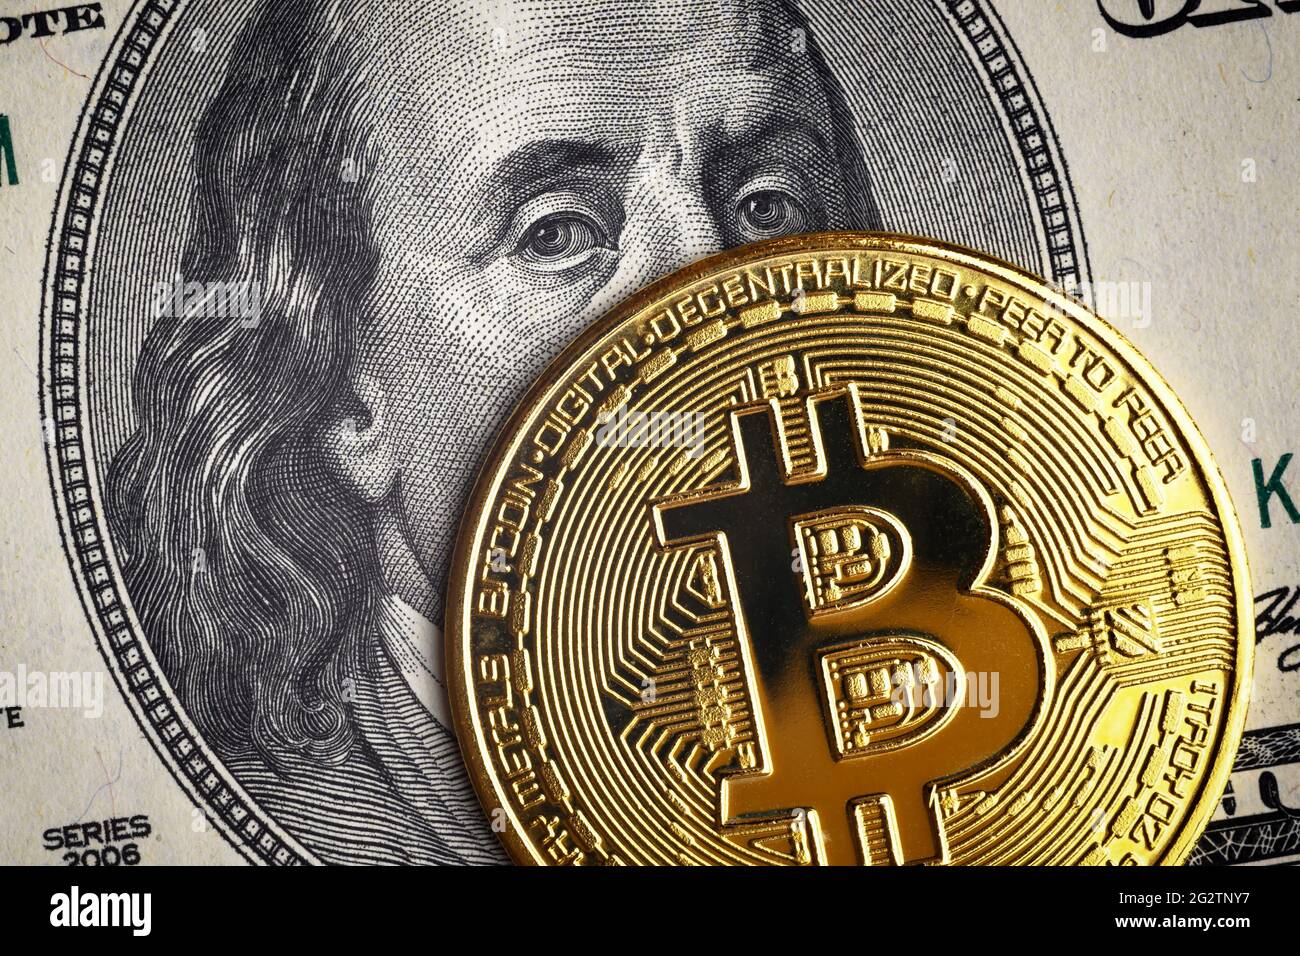 Bitcoin vs US dollar, gold bit coin on 100 dollar bill. Digital crypto currency bitcoin and Franklin portrait on money note. Concept of bank, bitcoin Stock Photo